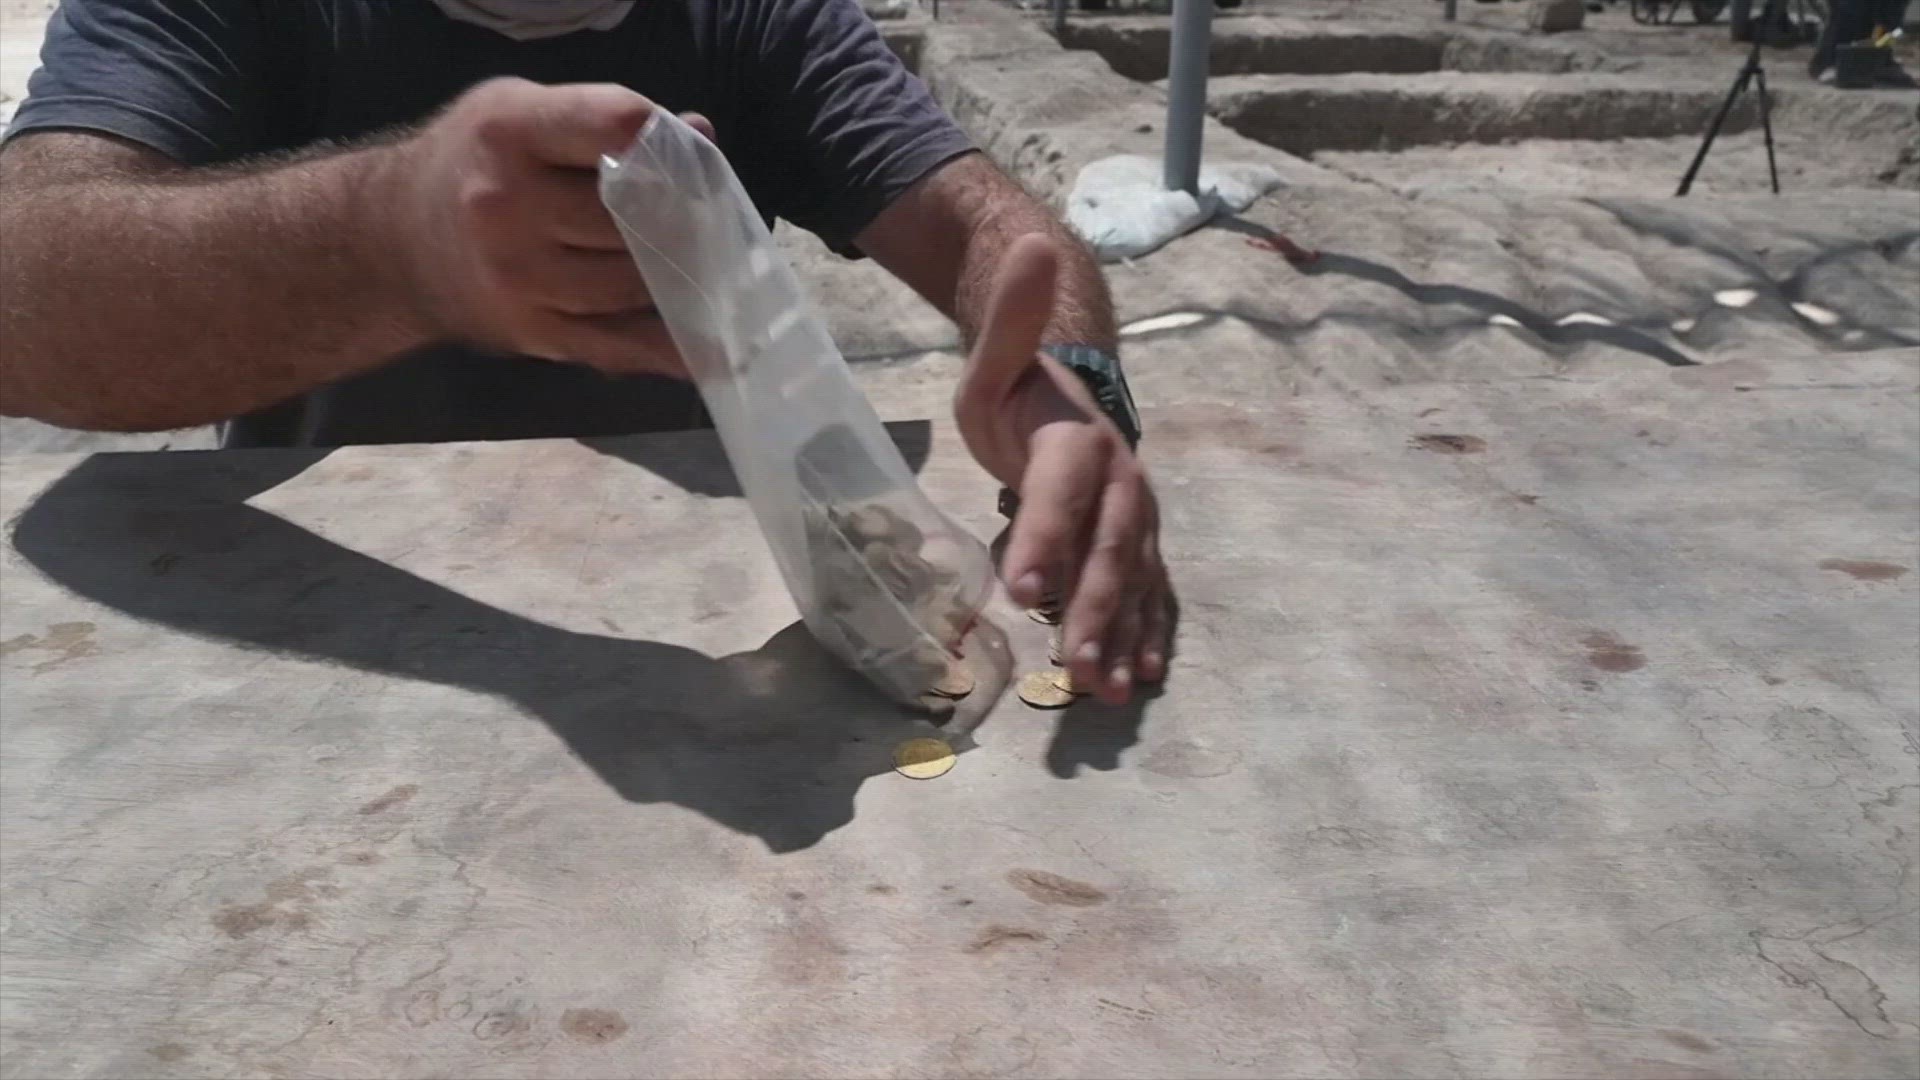 Volunteers find a fortune on an excavation site in Egypt. Buzz60's Elitsa Bizios reports.